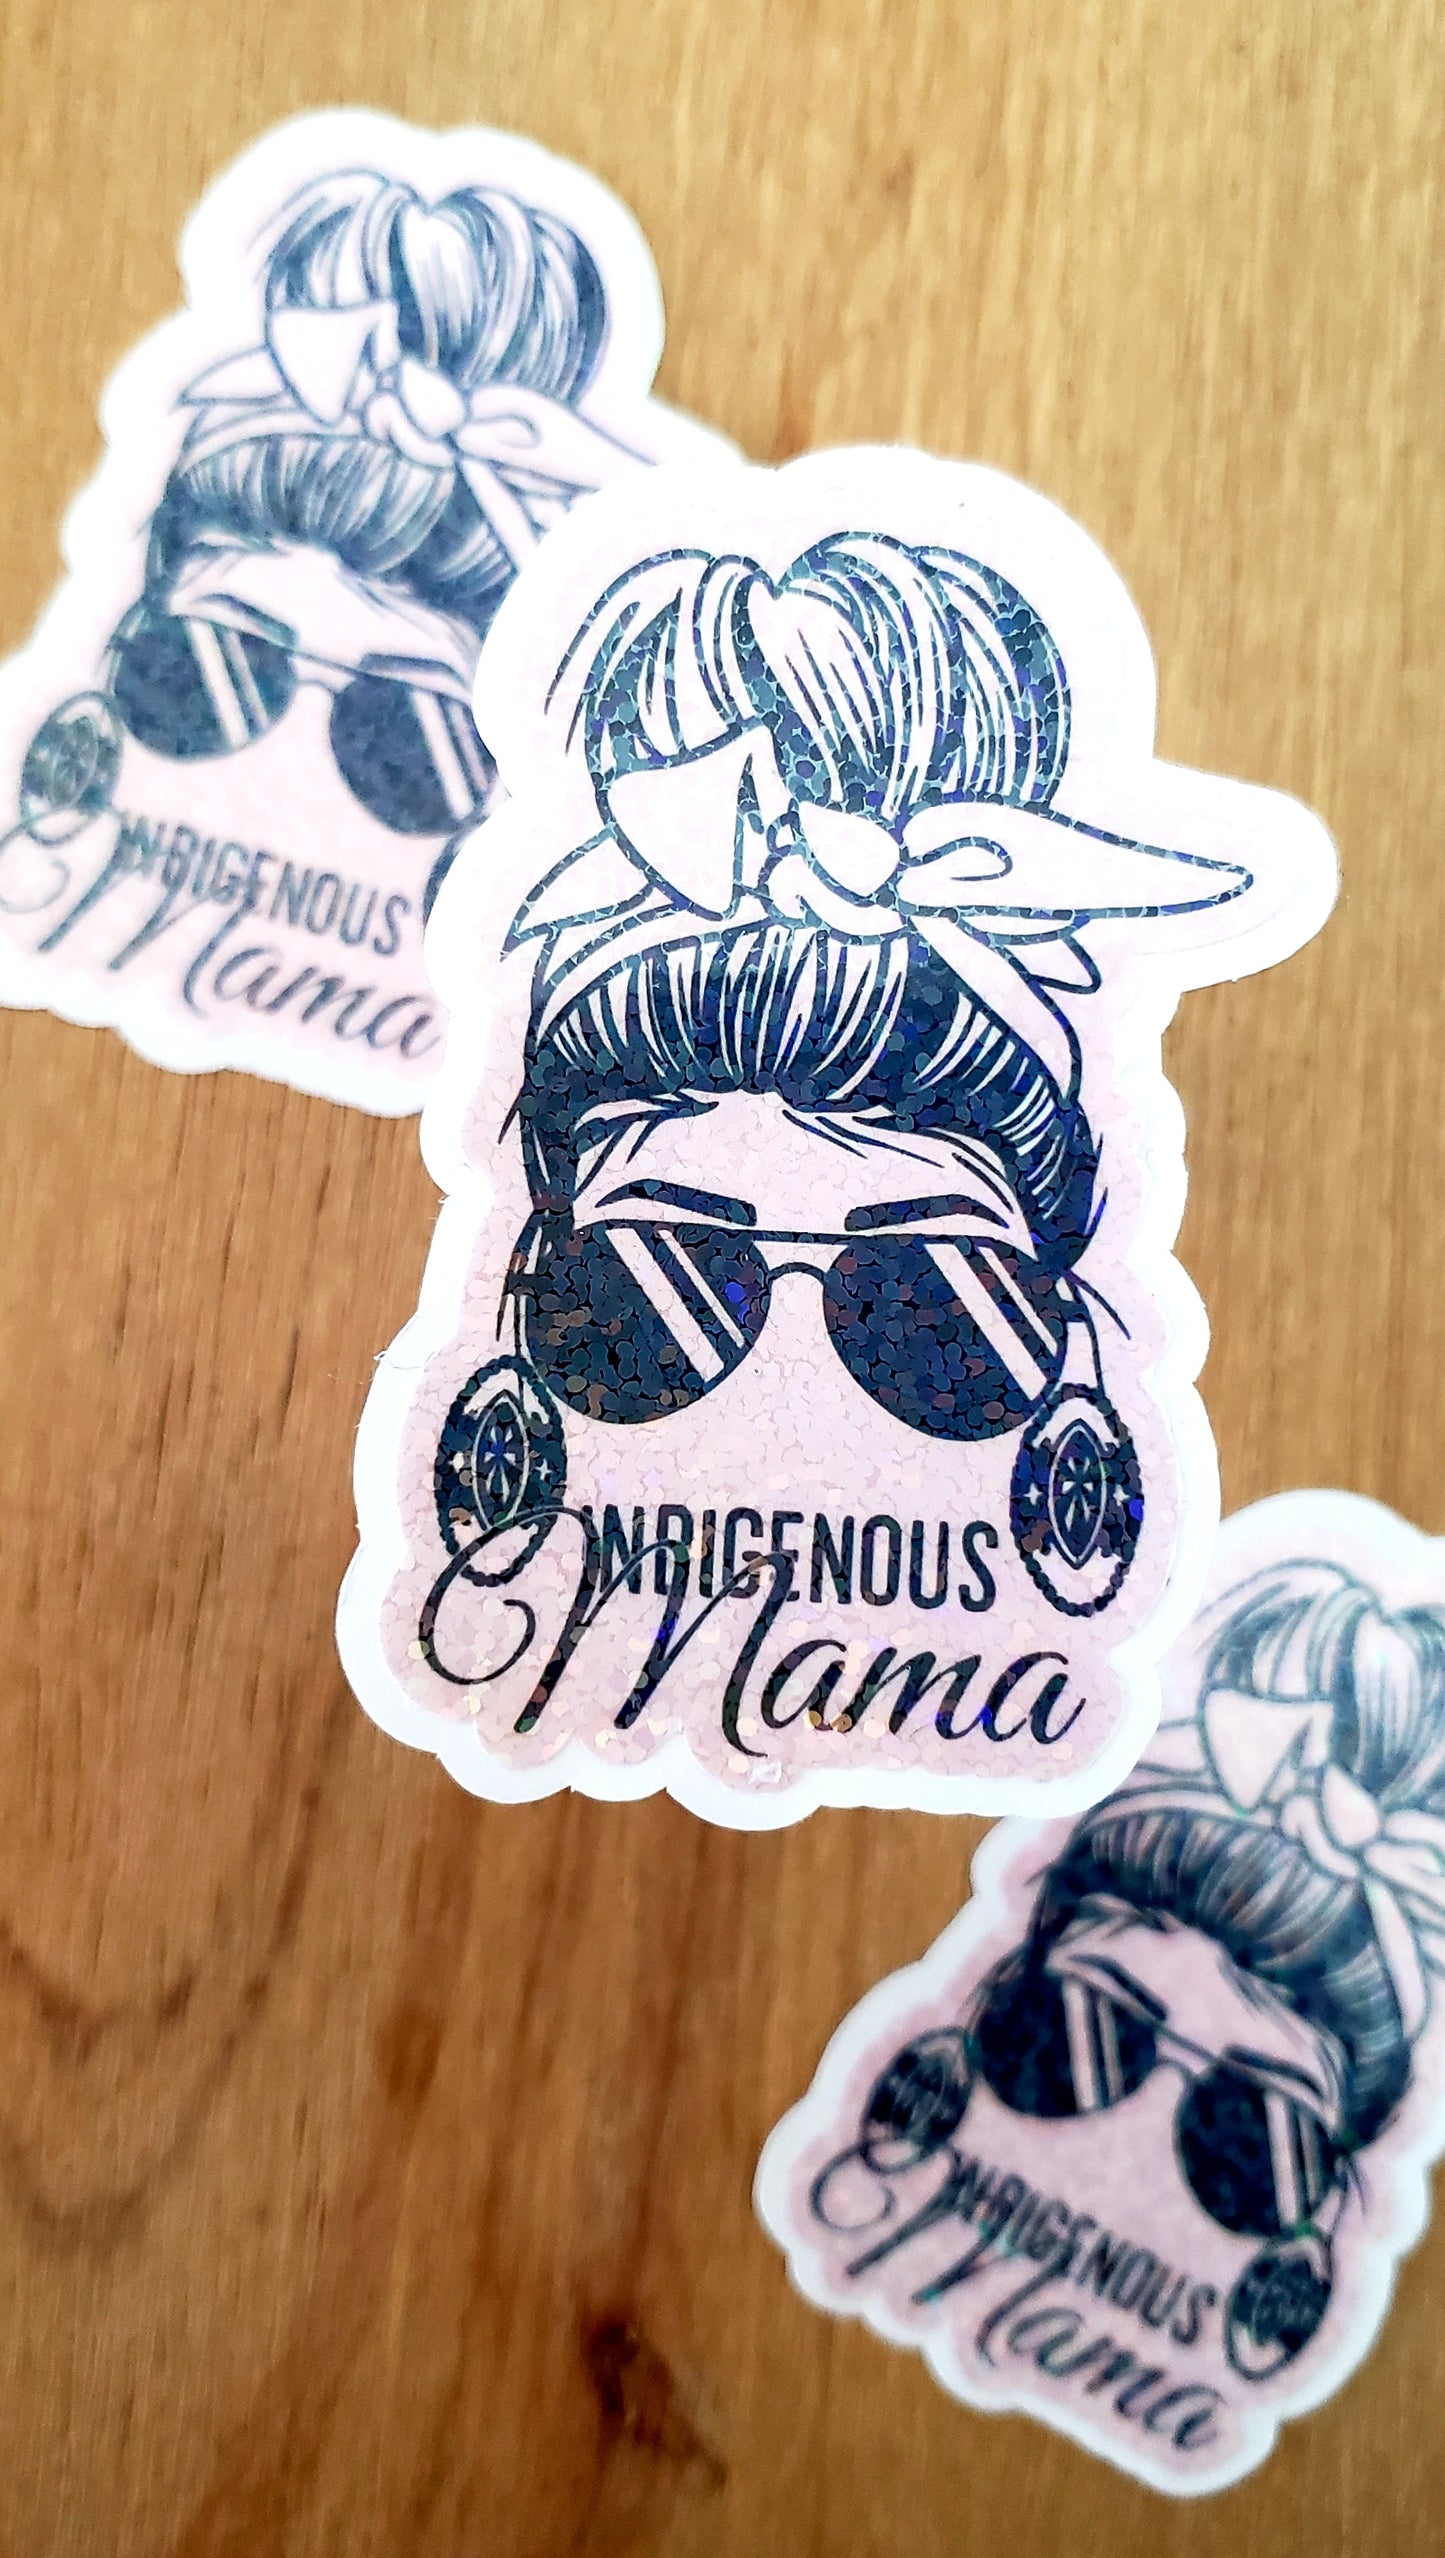 Indigenous Mama stickers